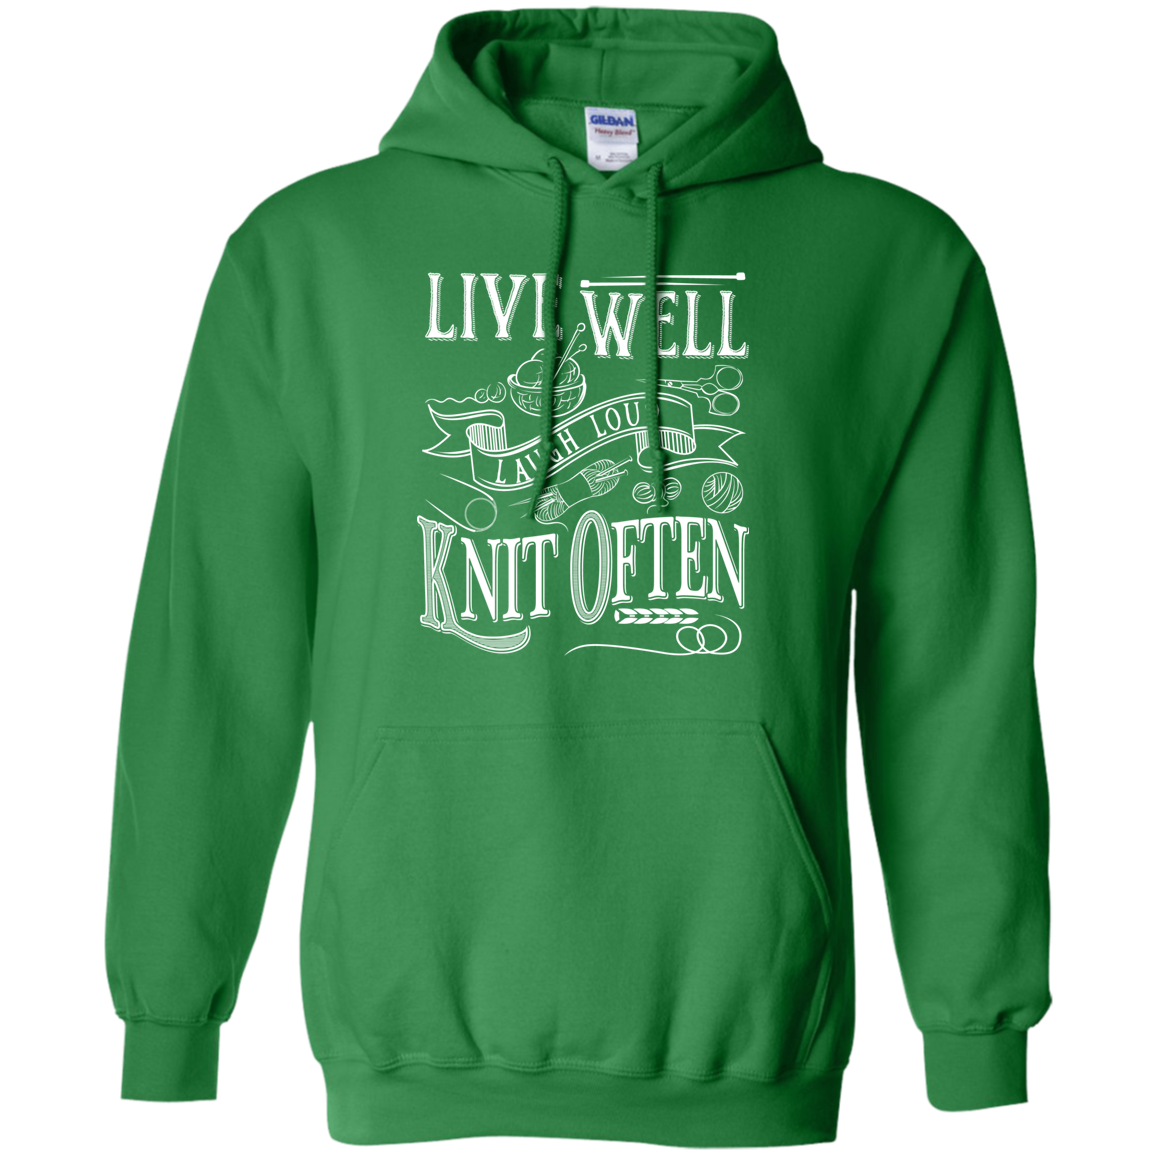 Knit Often Pullover Hoodie